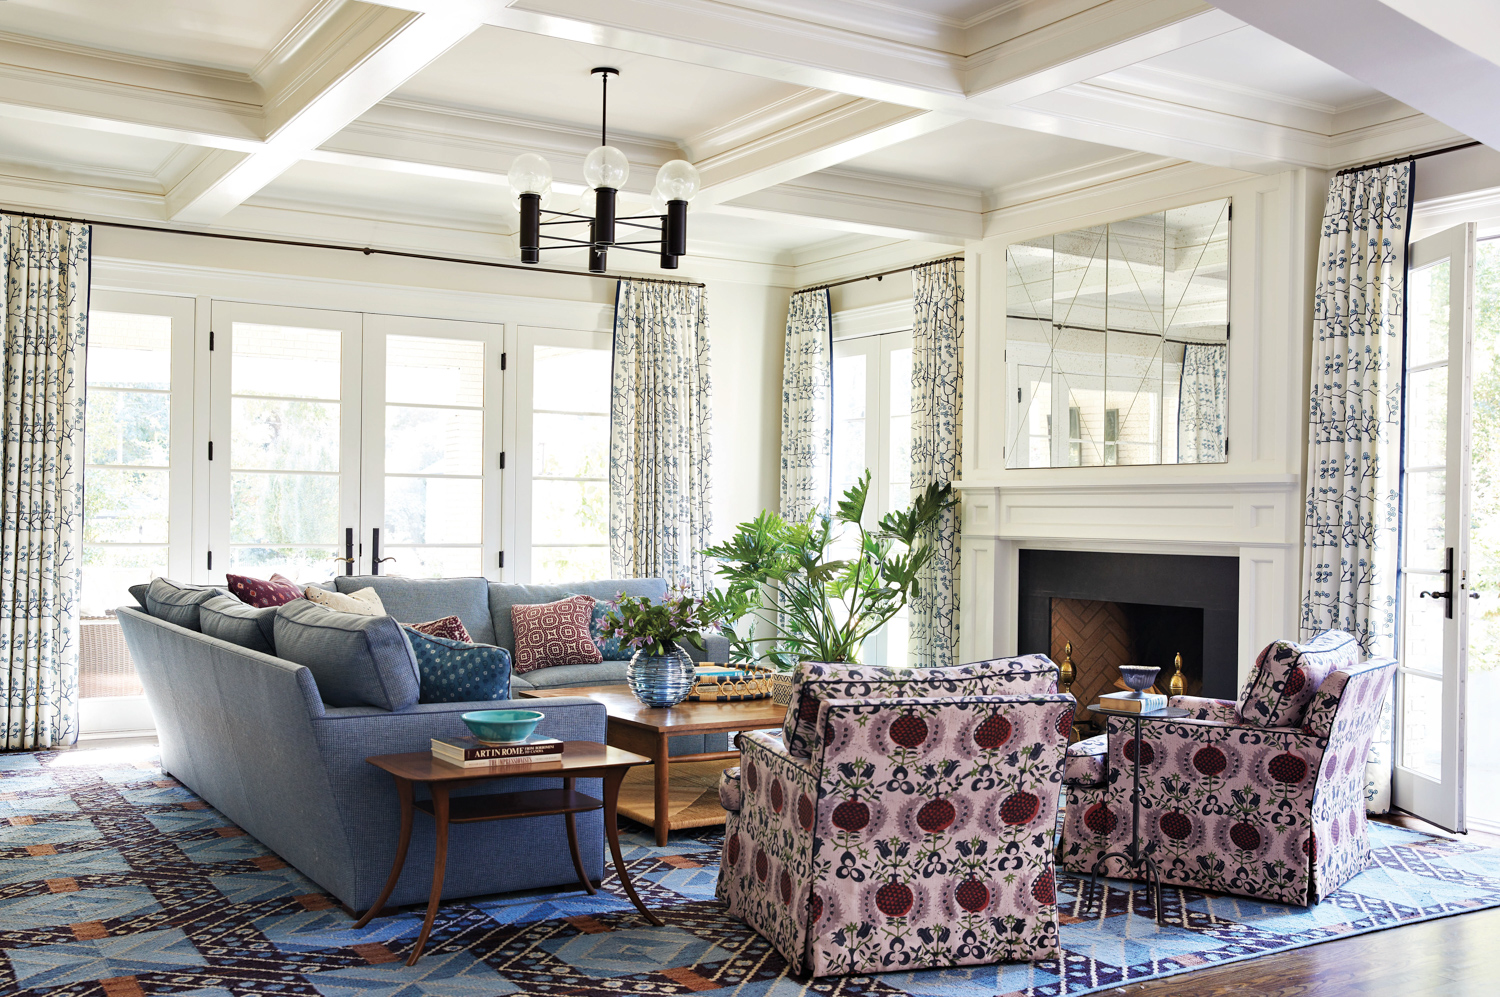 Admire This Historical Charlotte Abode Weaving Color And Personality